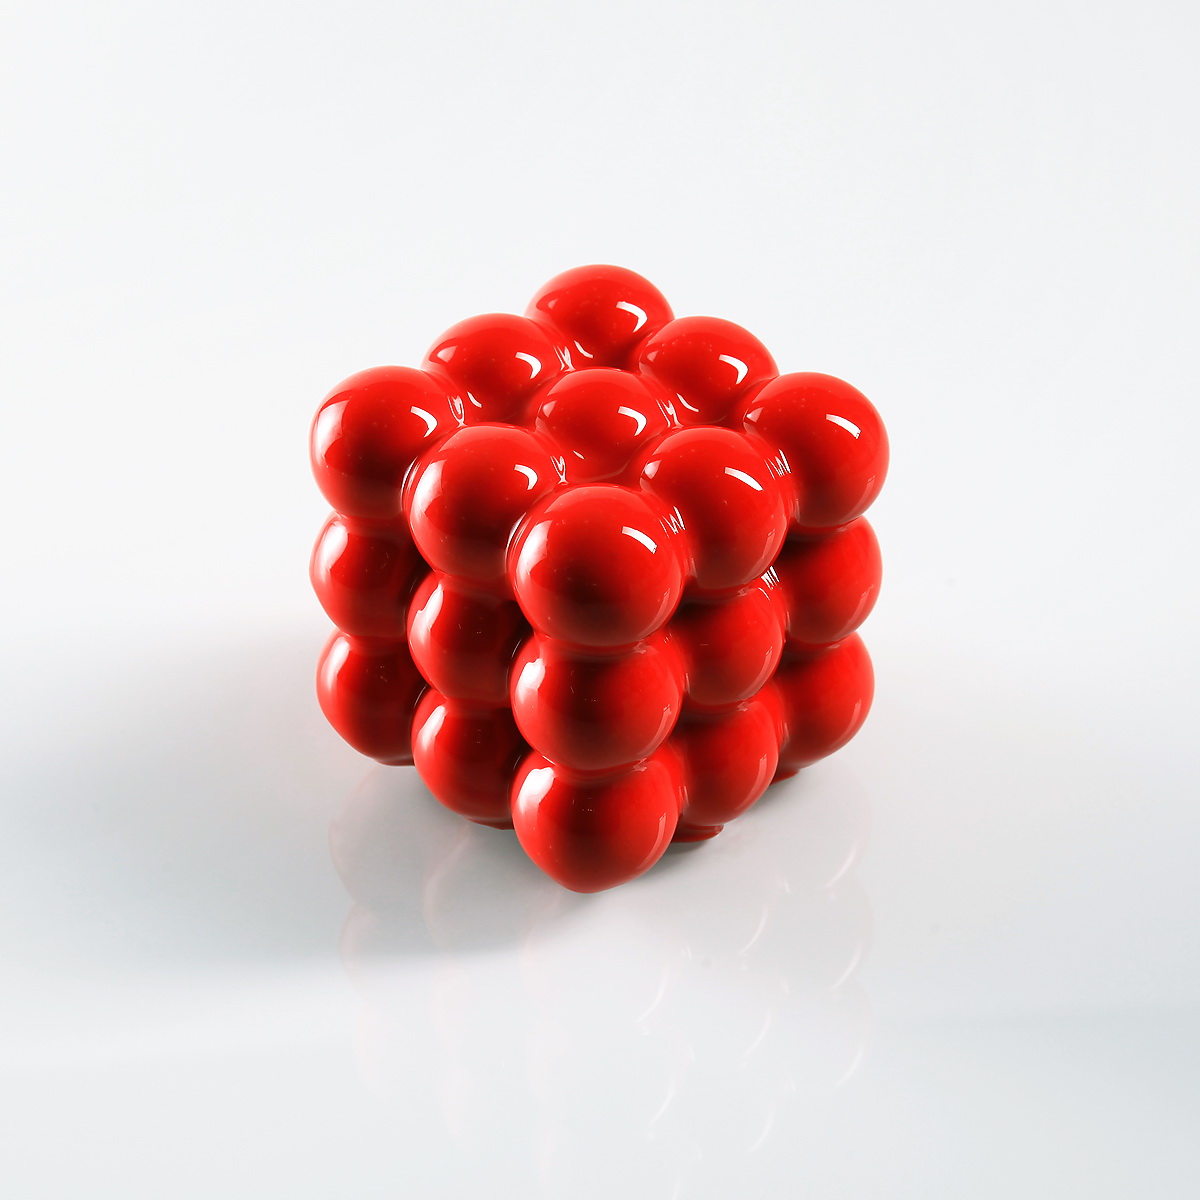 3*3*3 spheres from the series Geometric desserts